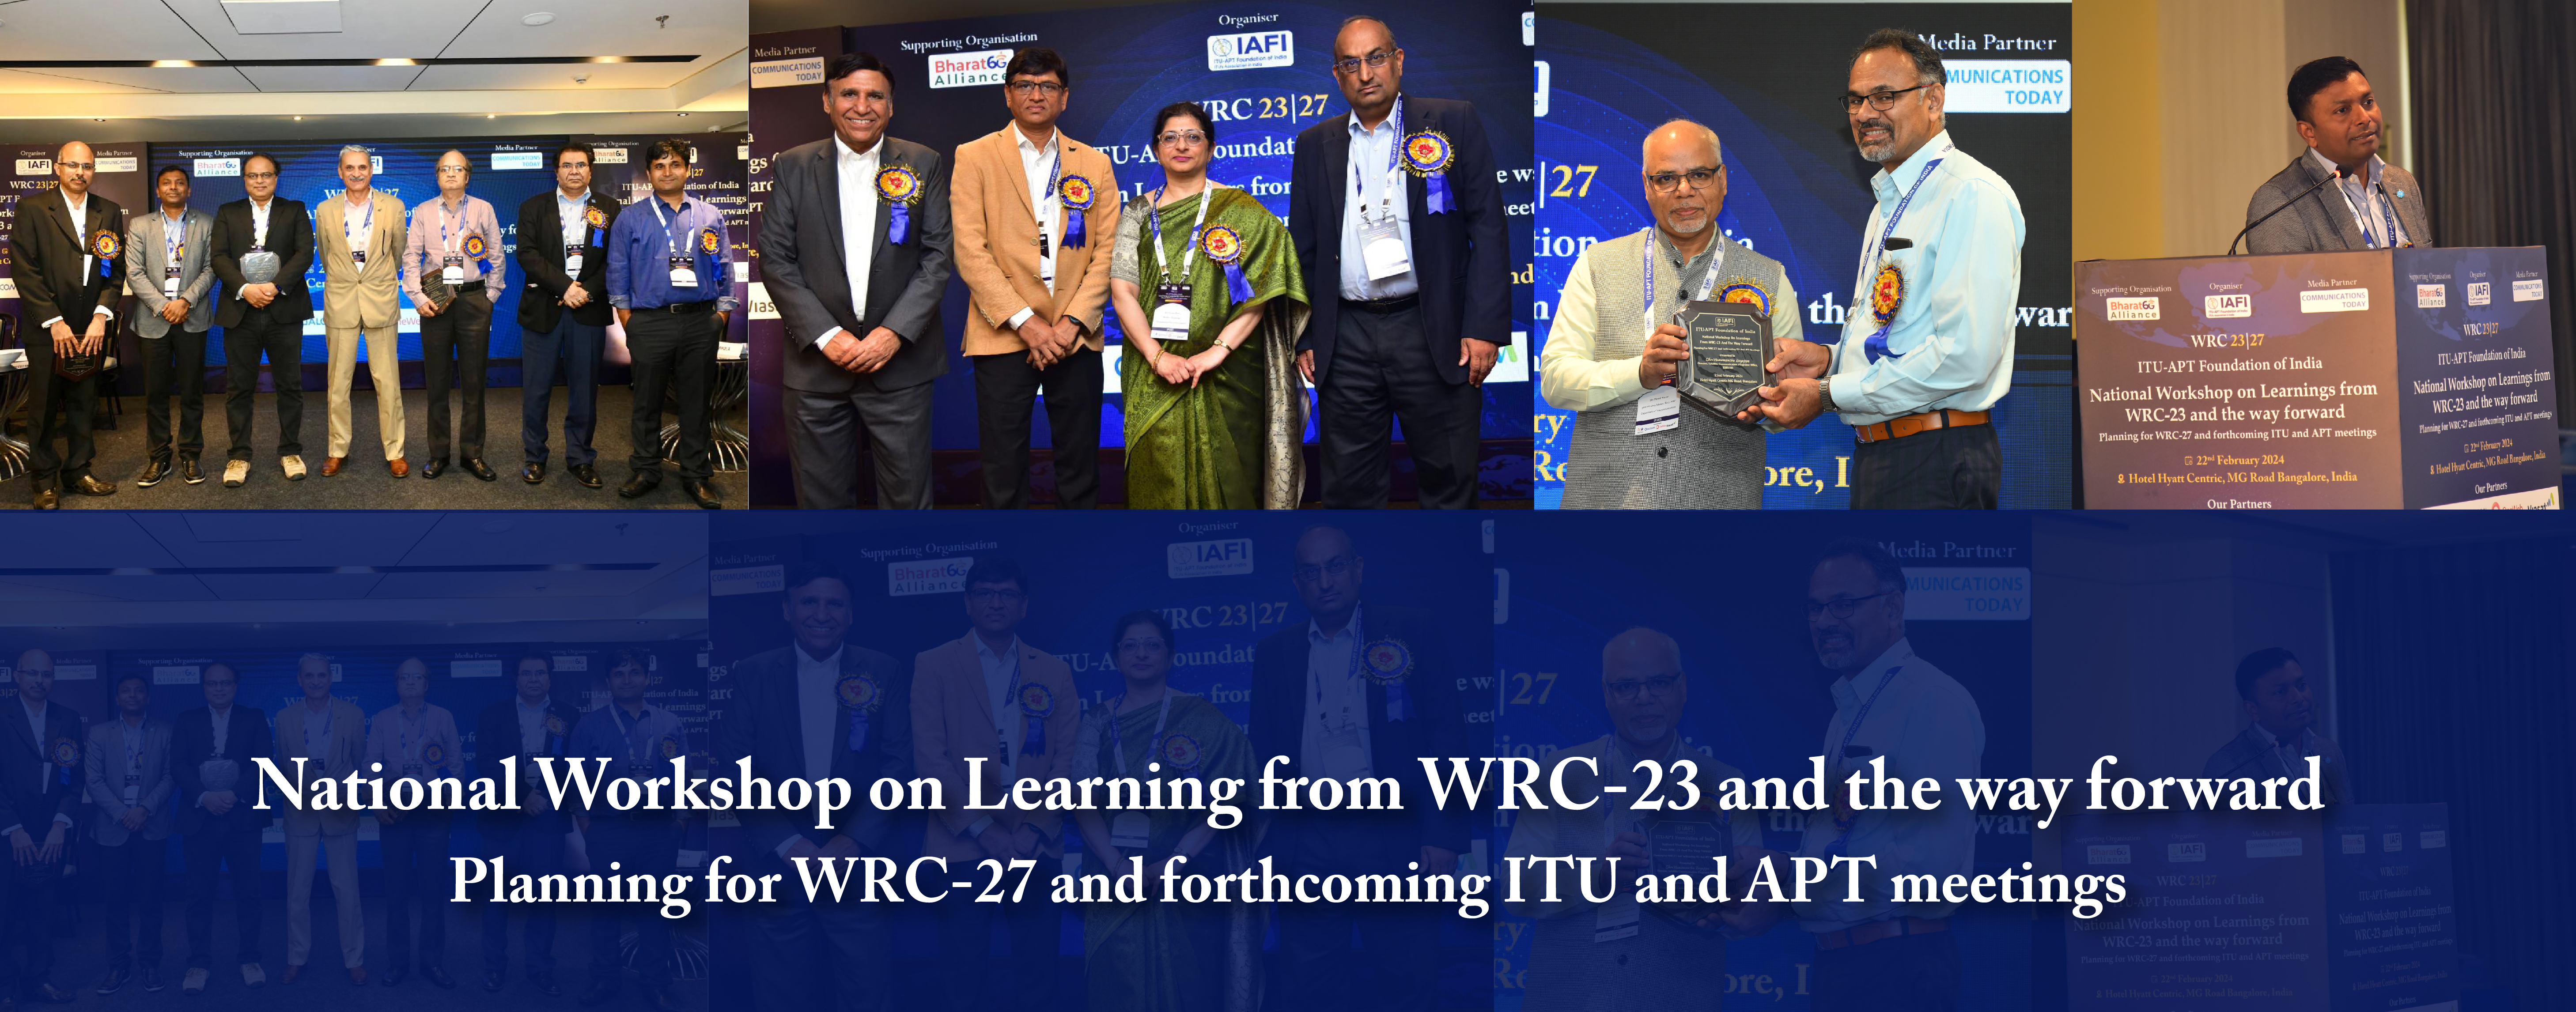 Learnings from WRC-23 and the way forward Planning for WRC-27 and forthcoming ITU and APT meetings